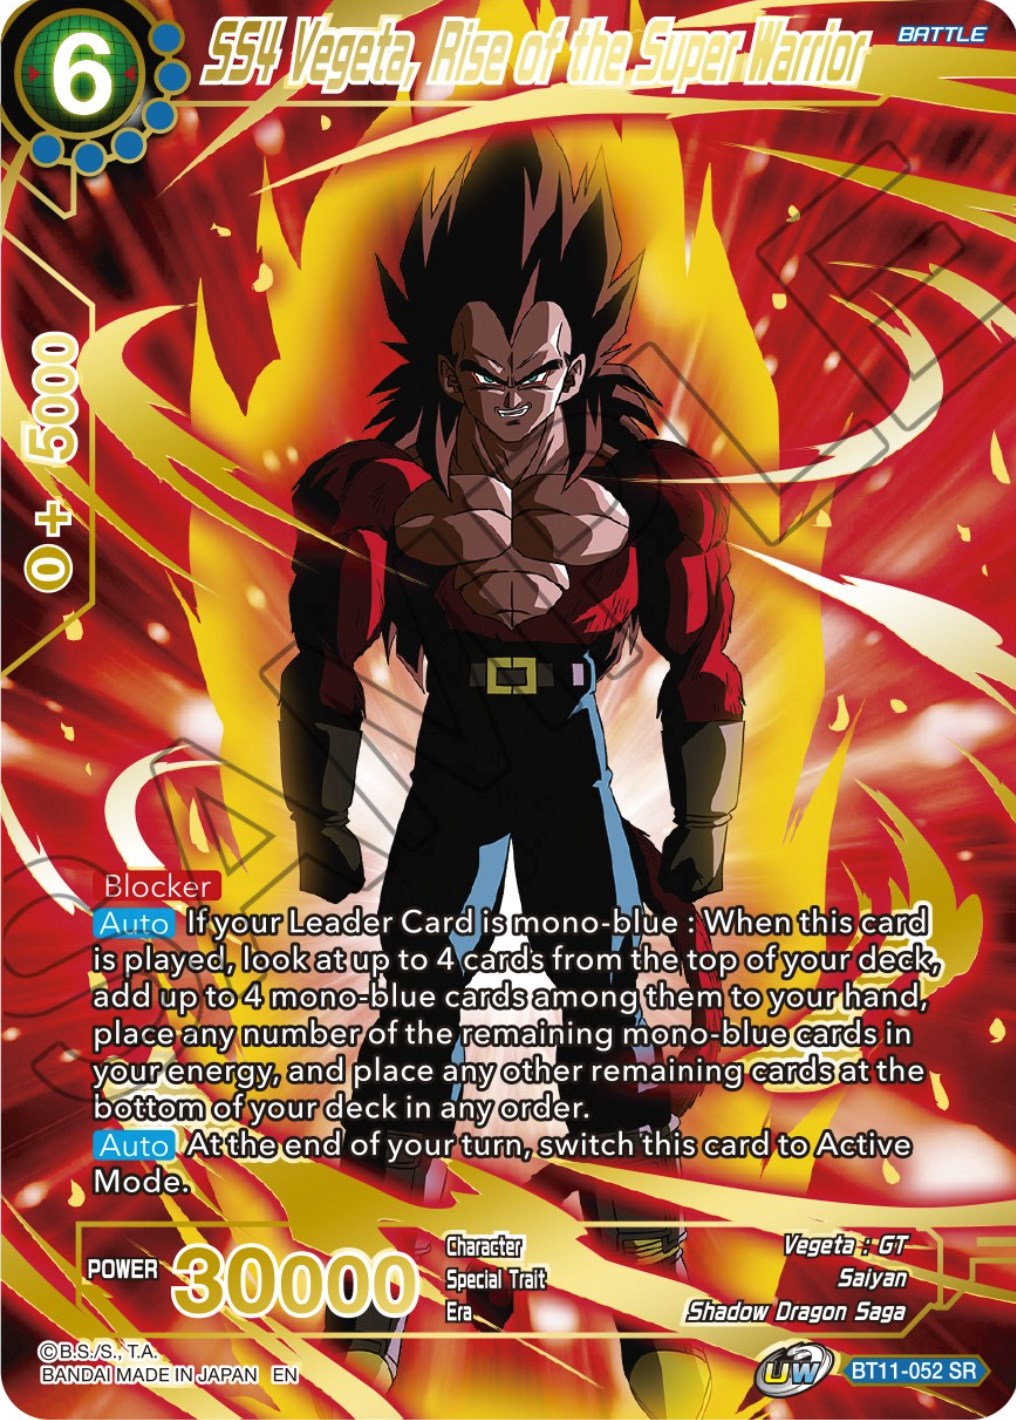 SS4 Vegeta, Rise of the Super Warrior (BT11-052) [Theme Selection: History of Vegeta] | North Valley Games